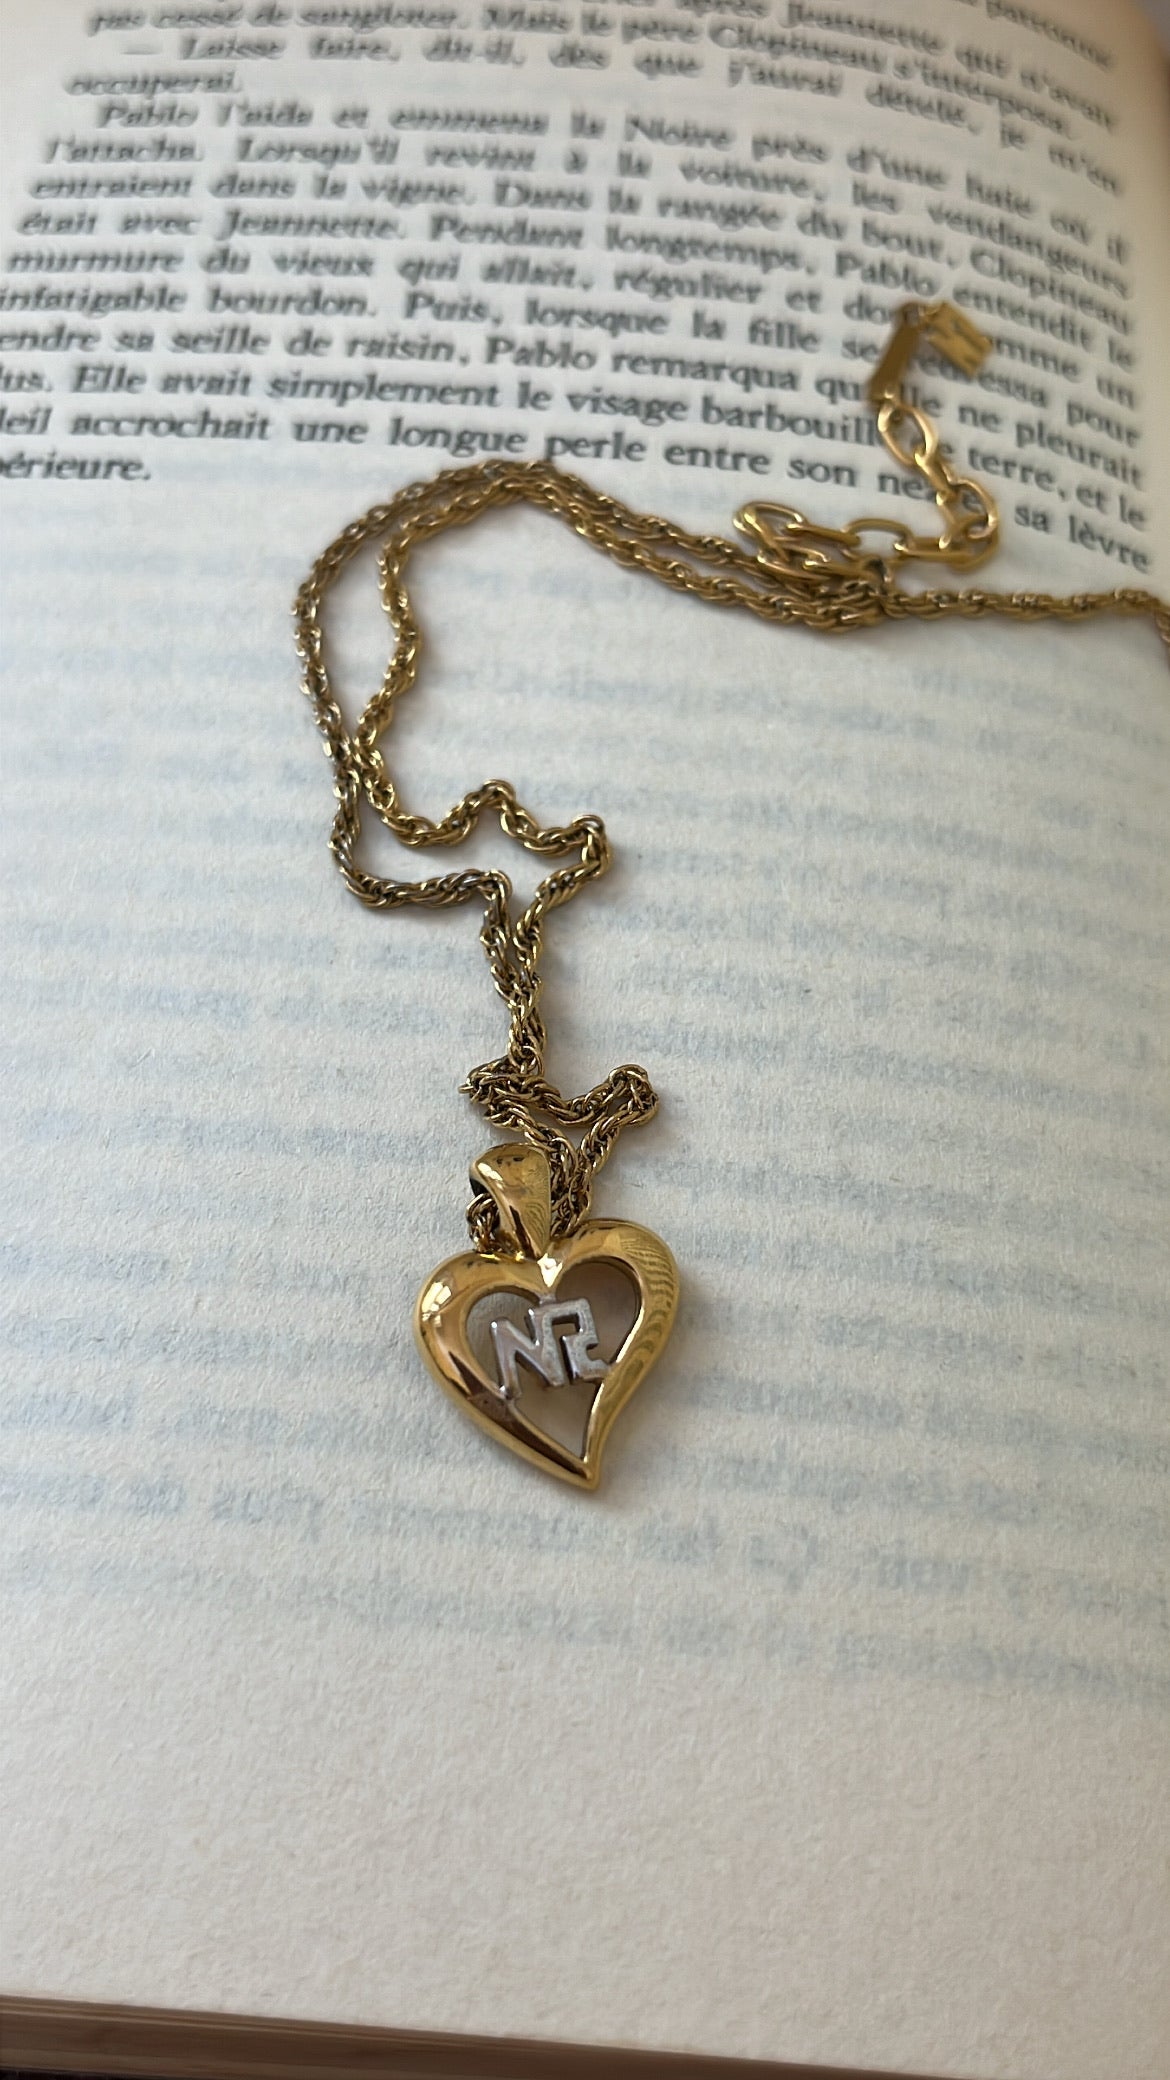 Picture Necklace - Heart Photo